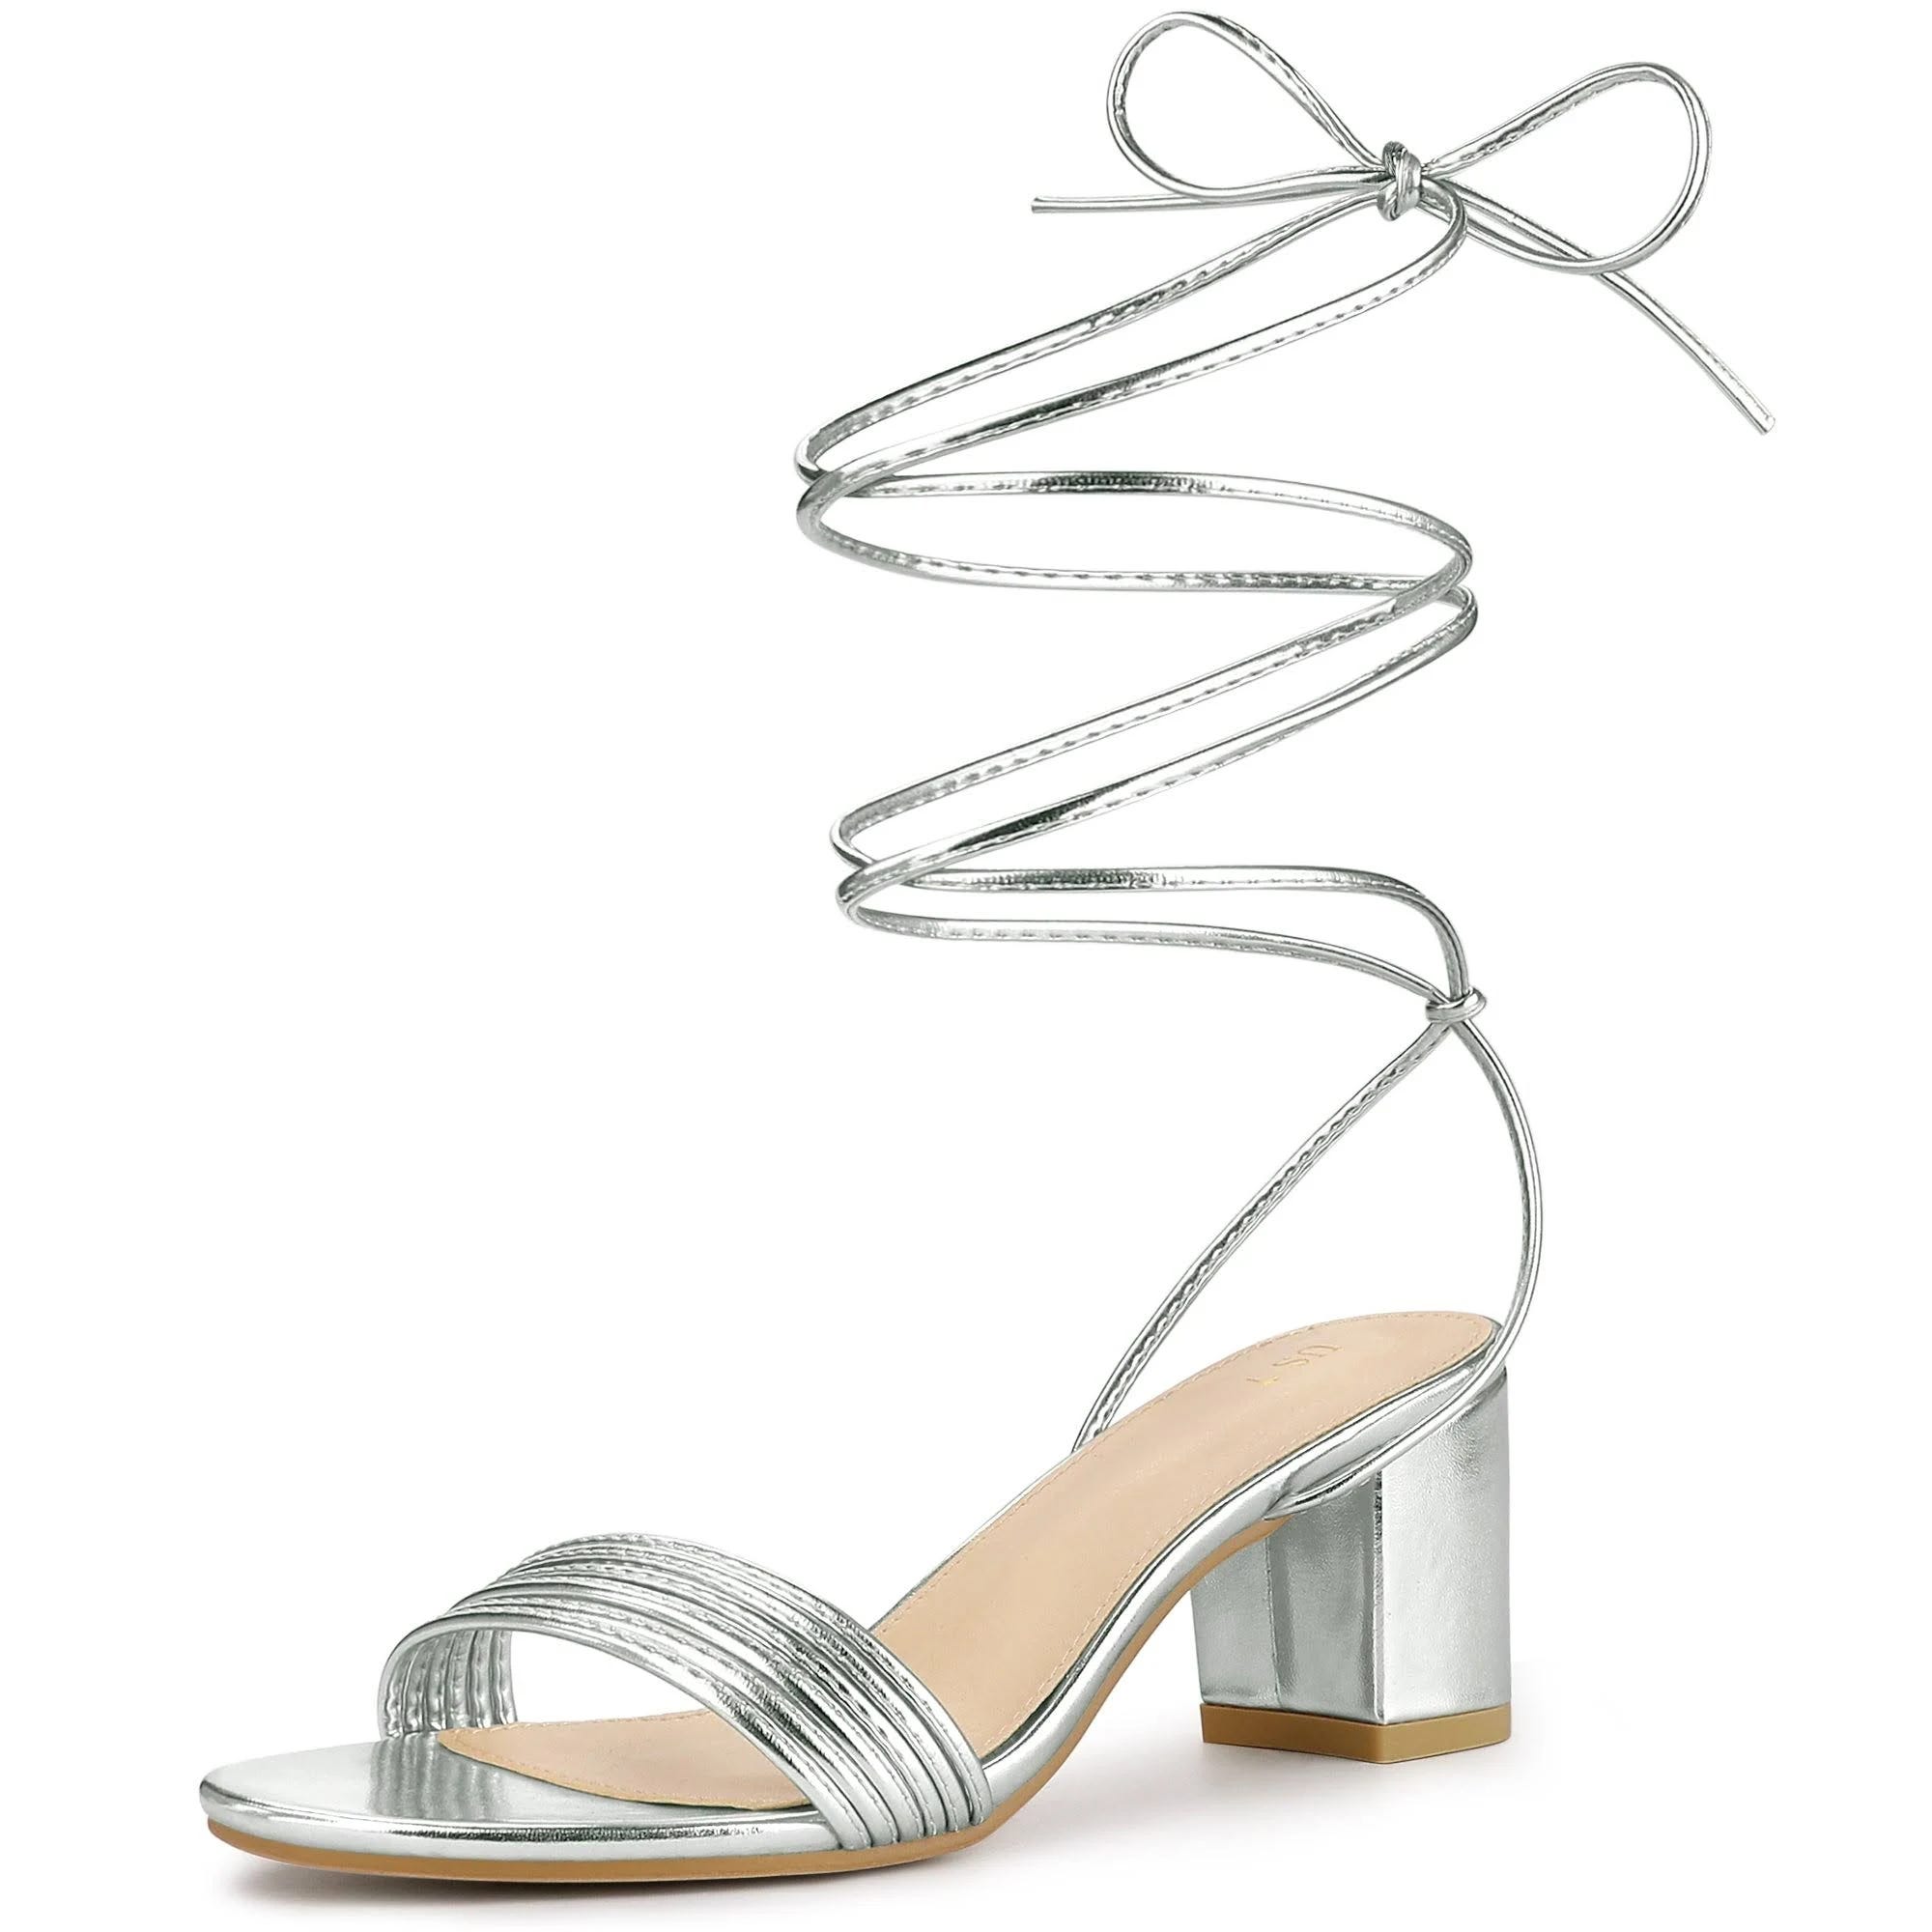 Silver Sparkly Lace-Up Strappy Heels with Adjustable Straps | Image